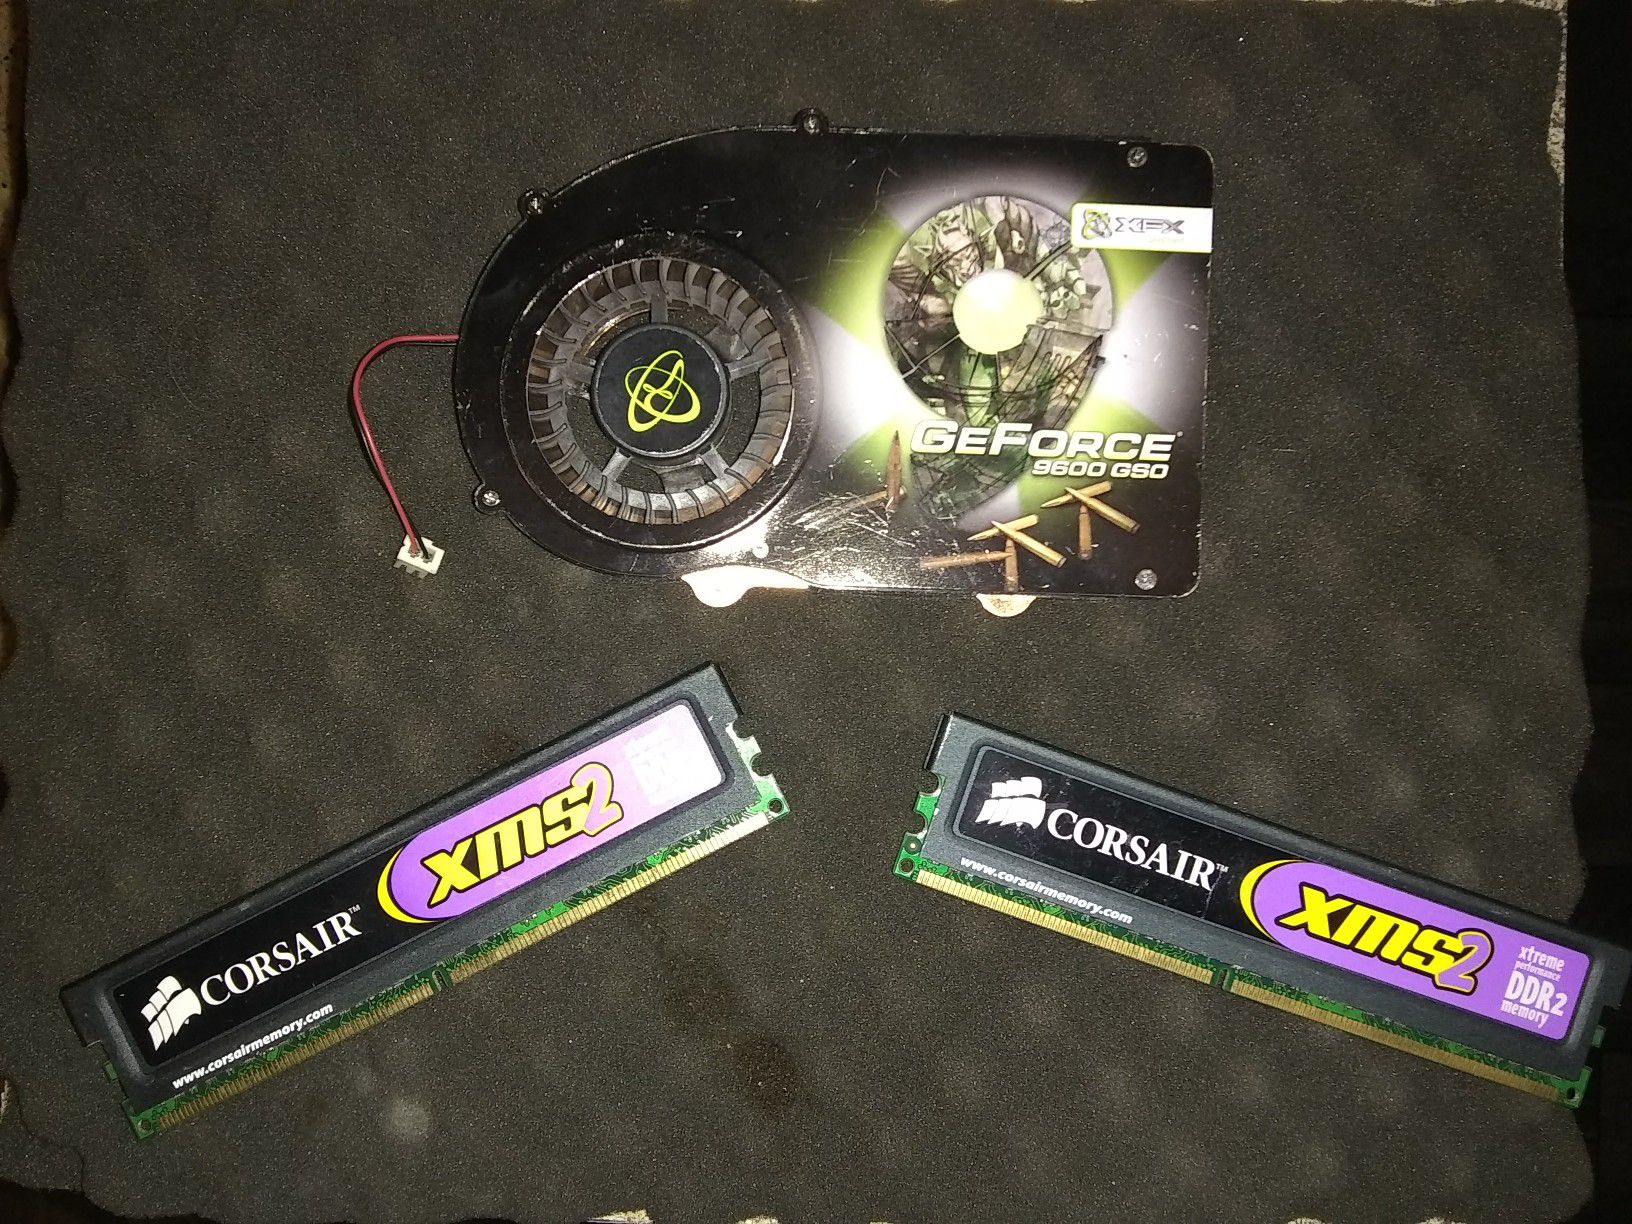 GeForce 9600 GSO graffic card ,and "2" Corsair XMS2 memory chips